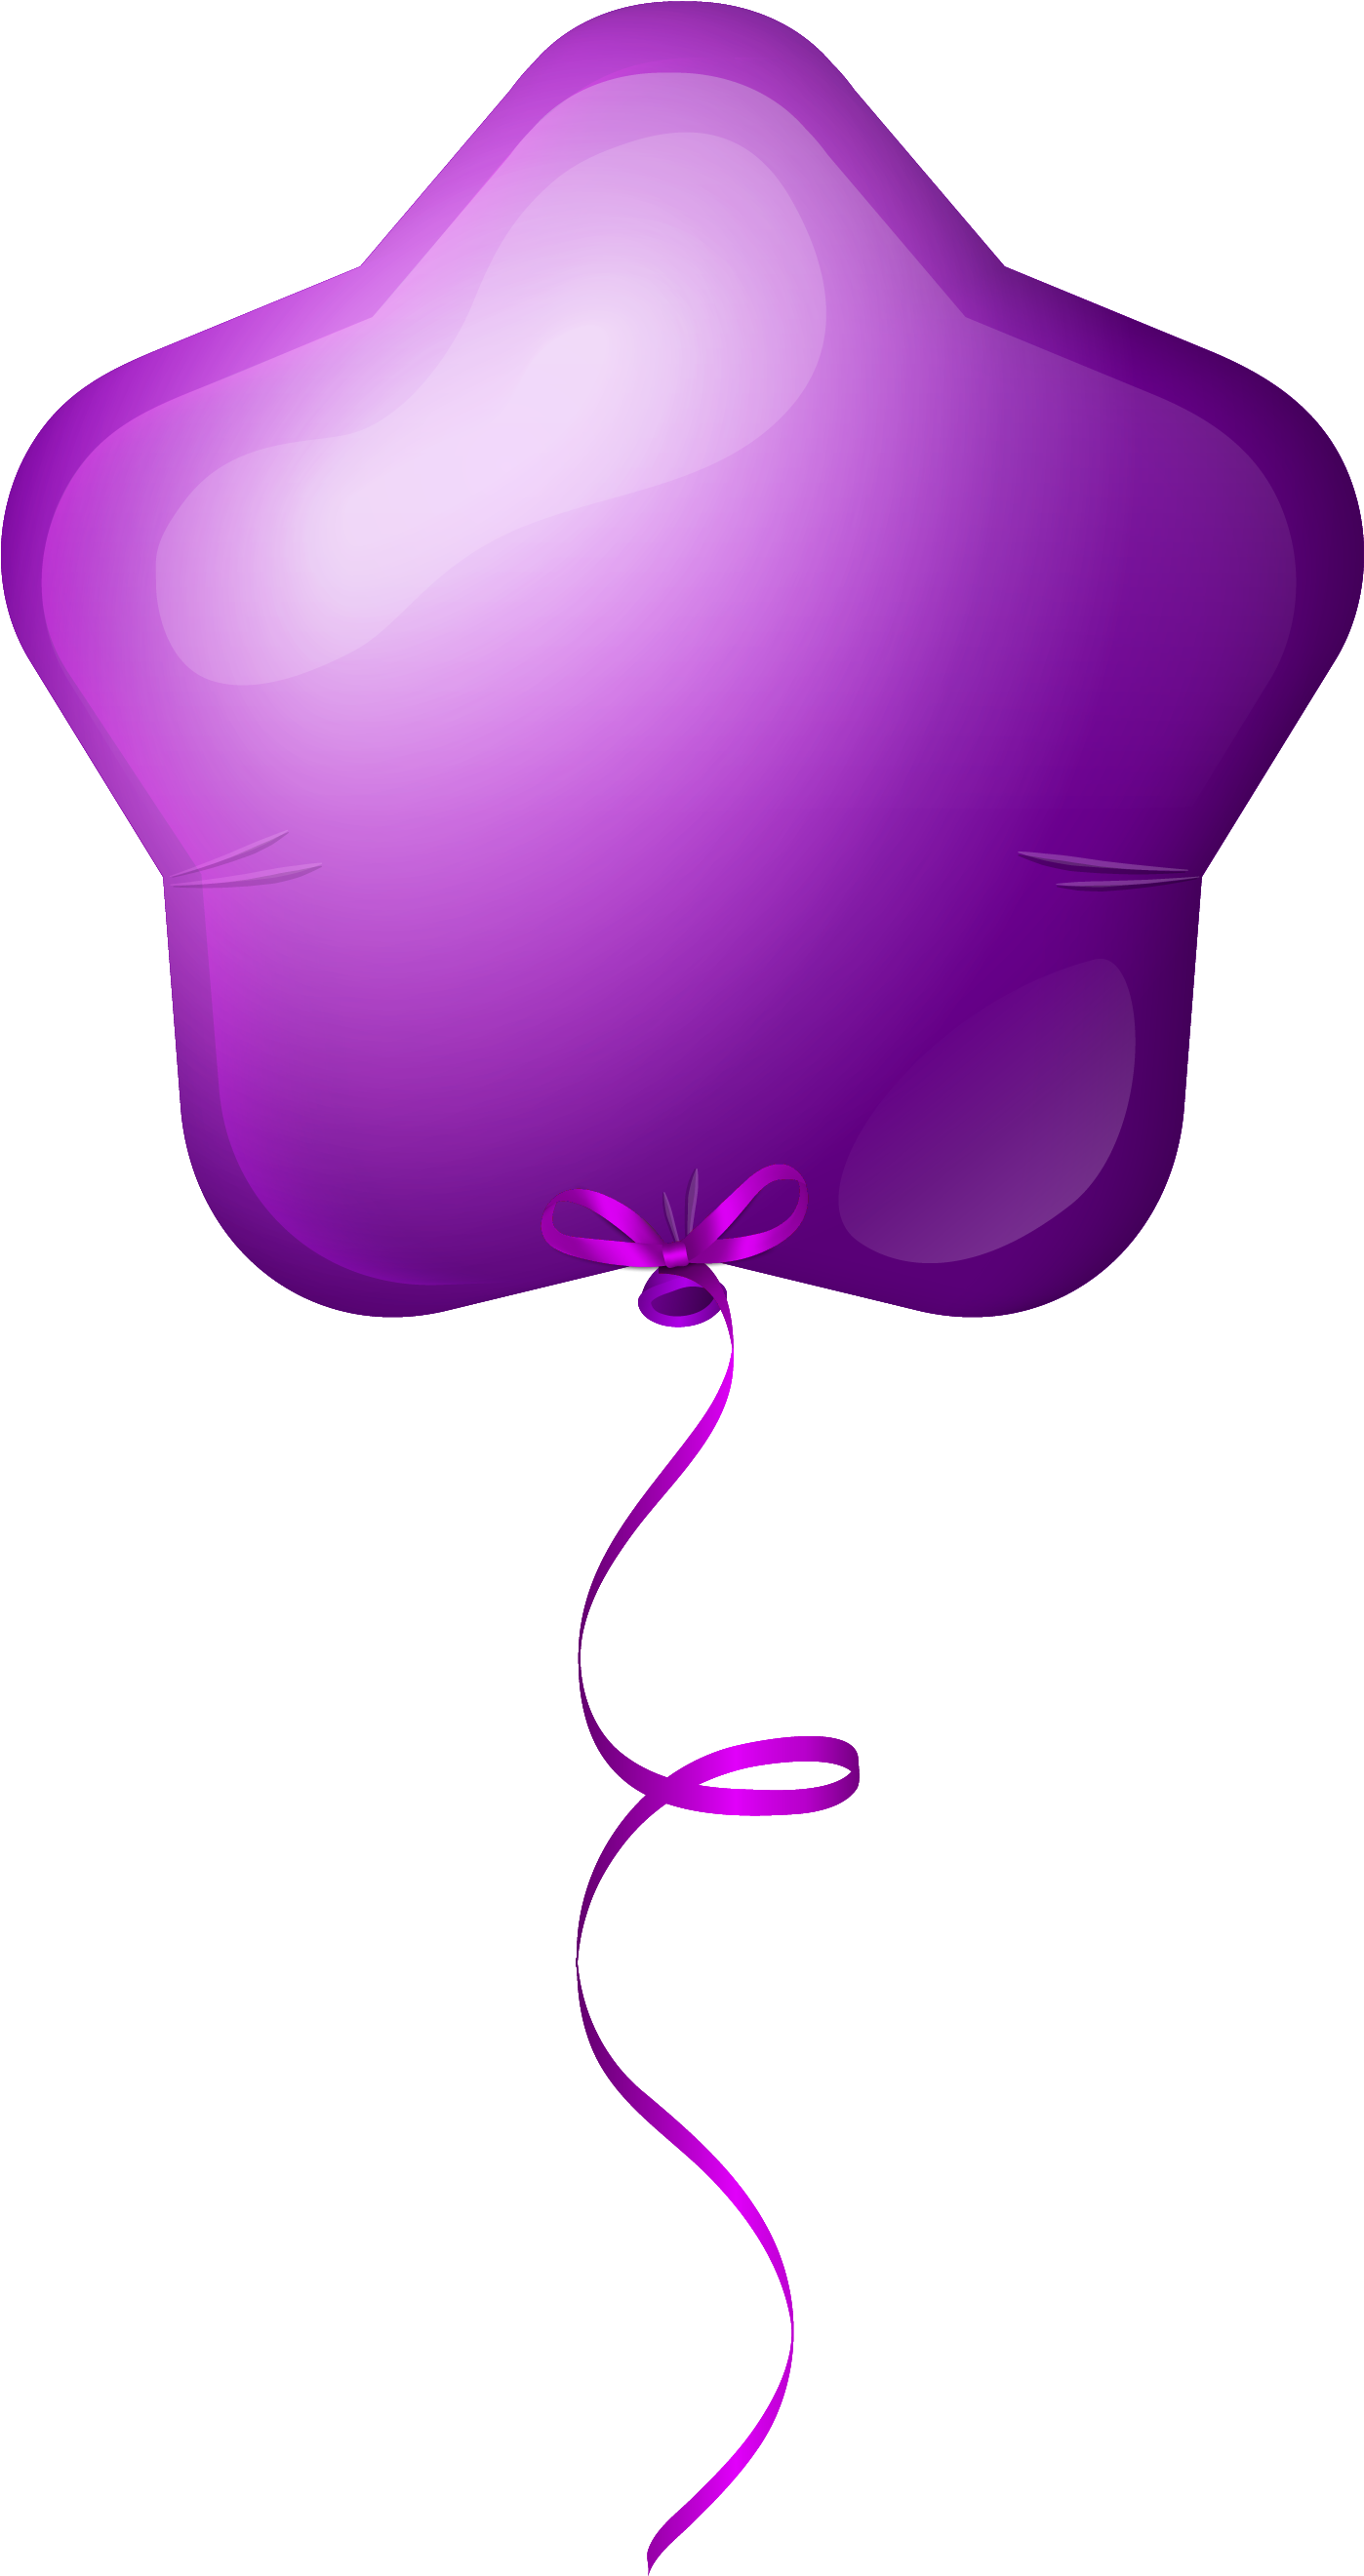 Clip Arts Related To - Clip Art Balloon Png (1560x2819)